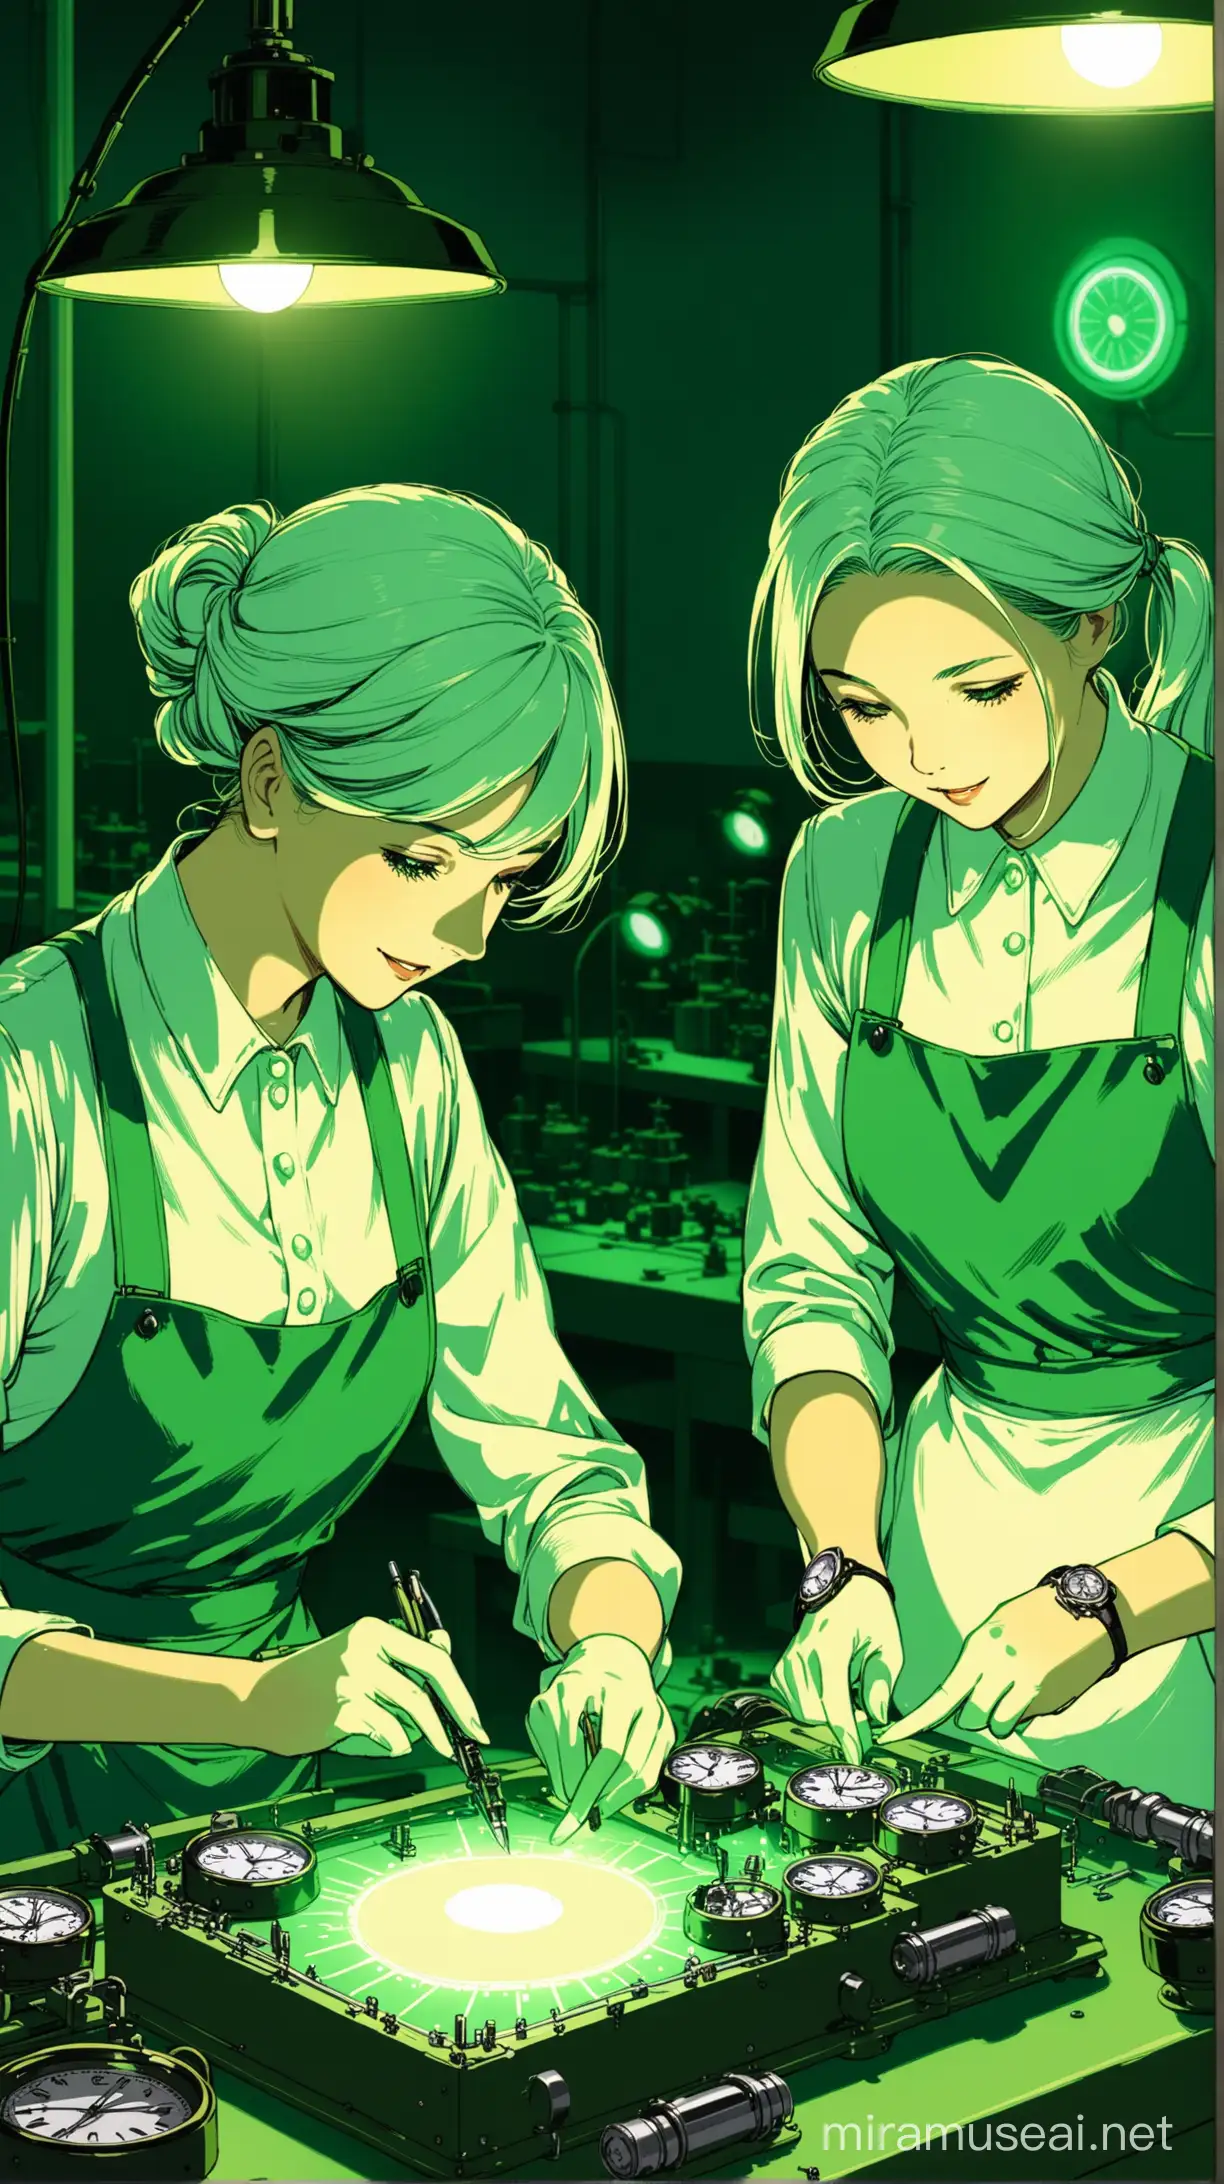 two radium glowing girls working on watches in watch factory
